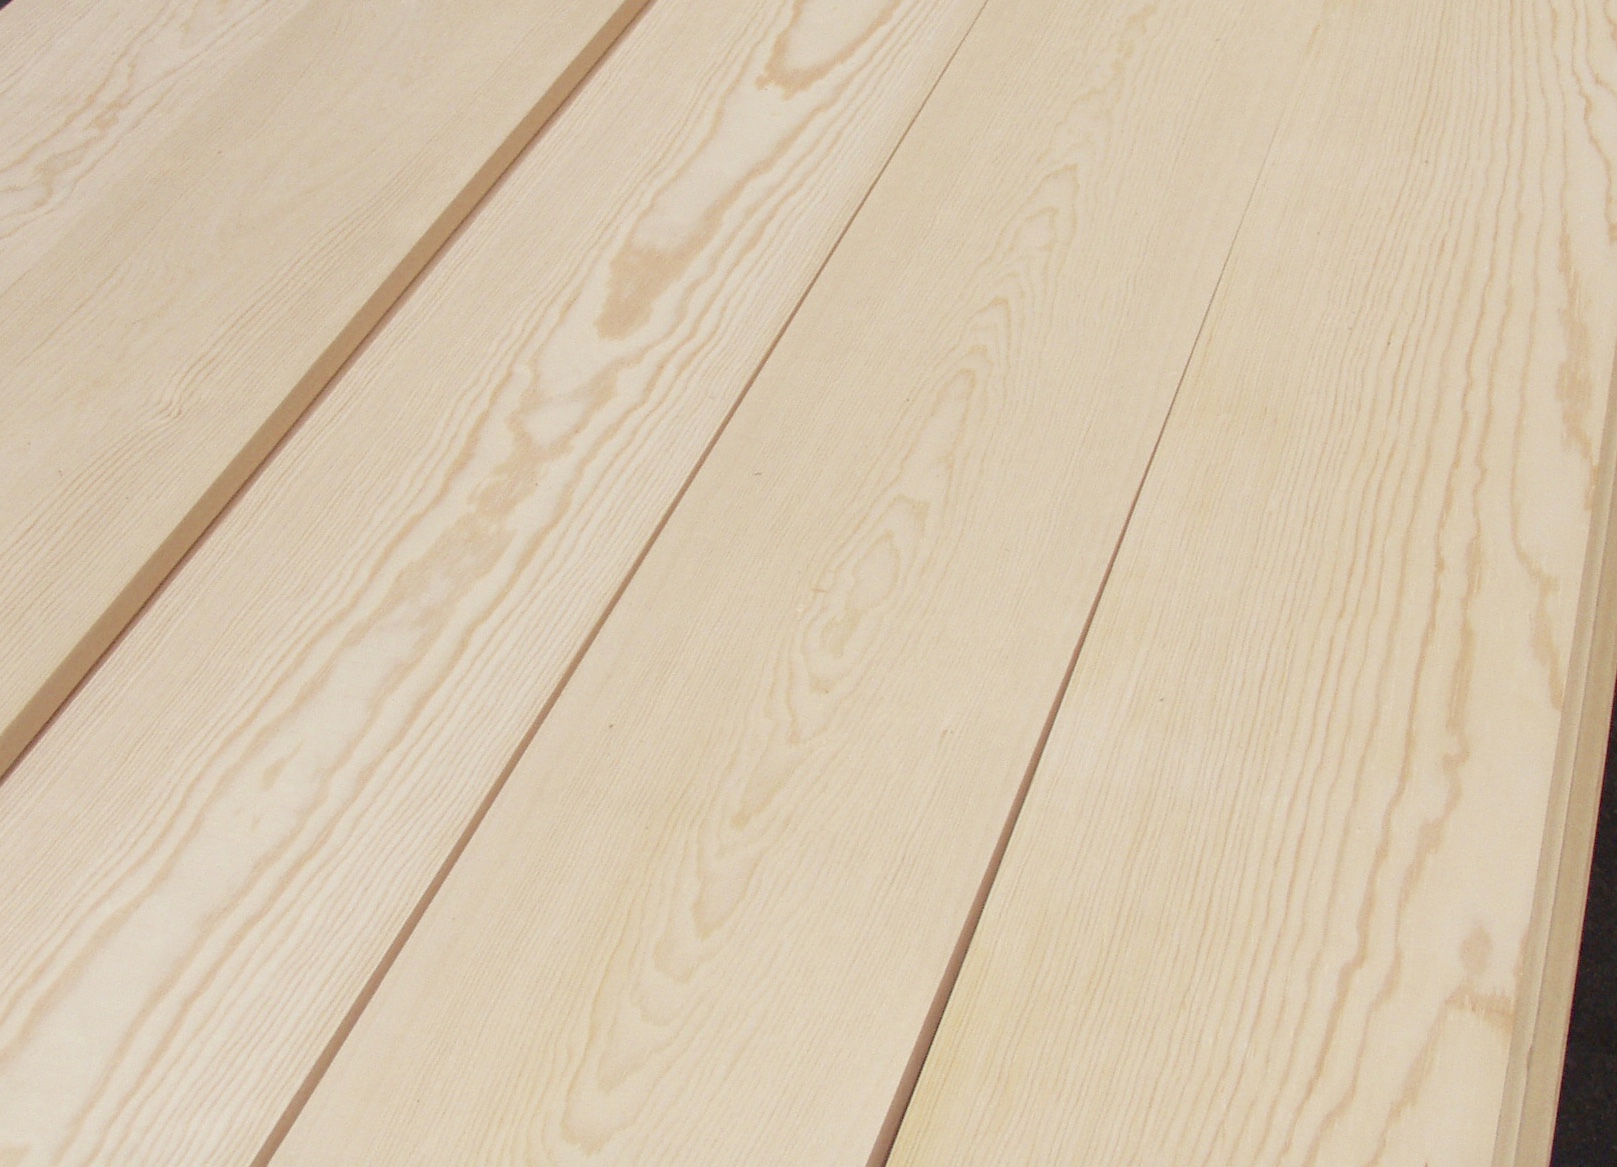 Inexpensive Wood Flooring Using Pine Boards All You Need To Know